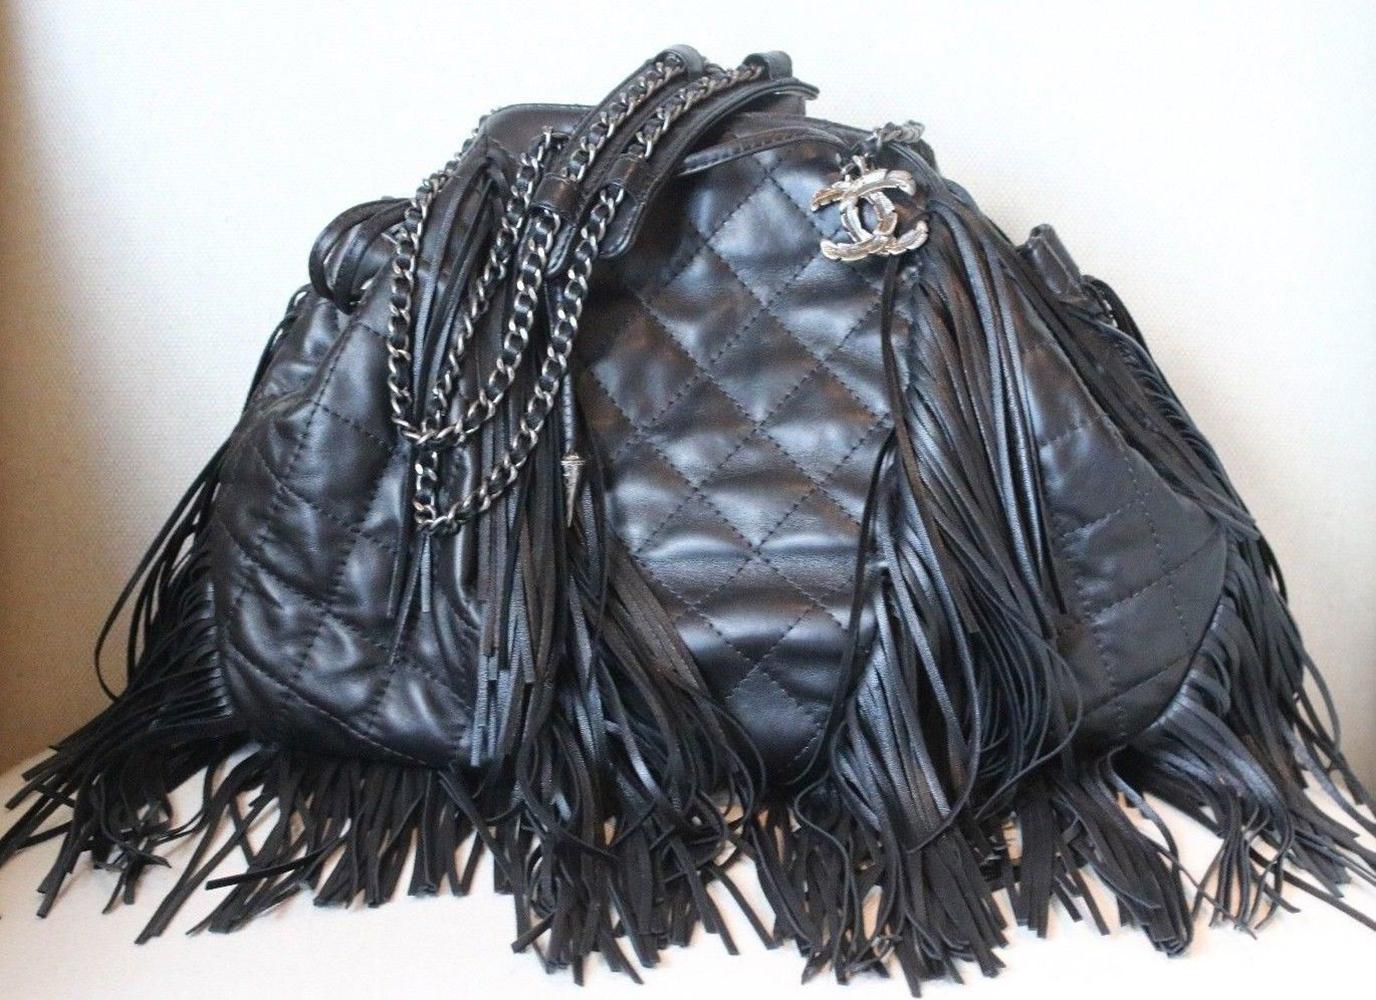 Chanel Bag. This authentic Chanel Paris-Dallas Drawstring Fringe Shoulder Bag Quilted Leather presented in the brand's Paris Dallas Metiers d'Art 2013-2014 Collection mixes avant-garde Parisian sophistication with a touch of western americana